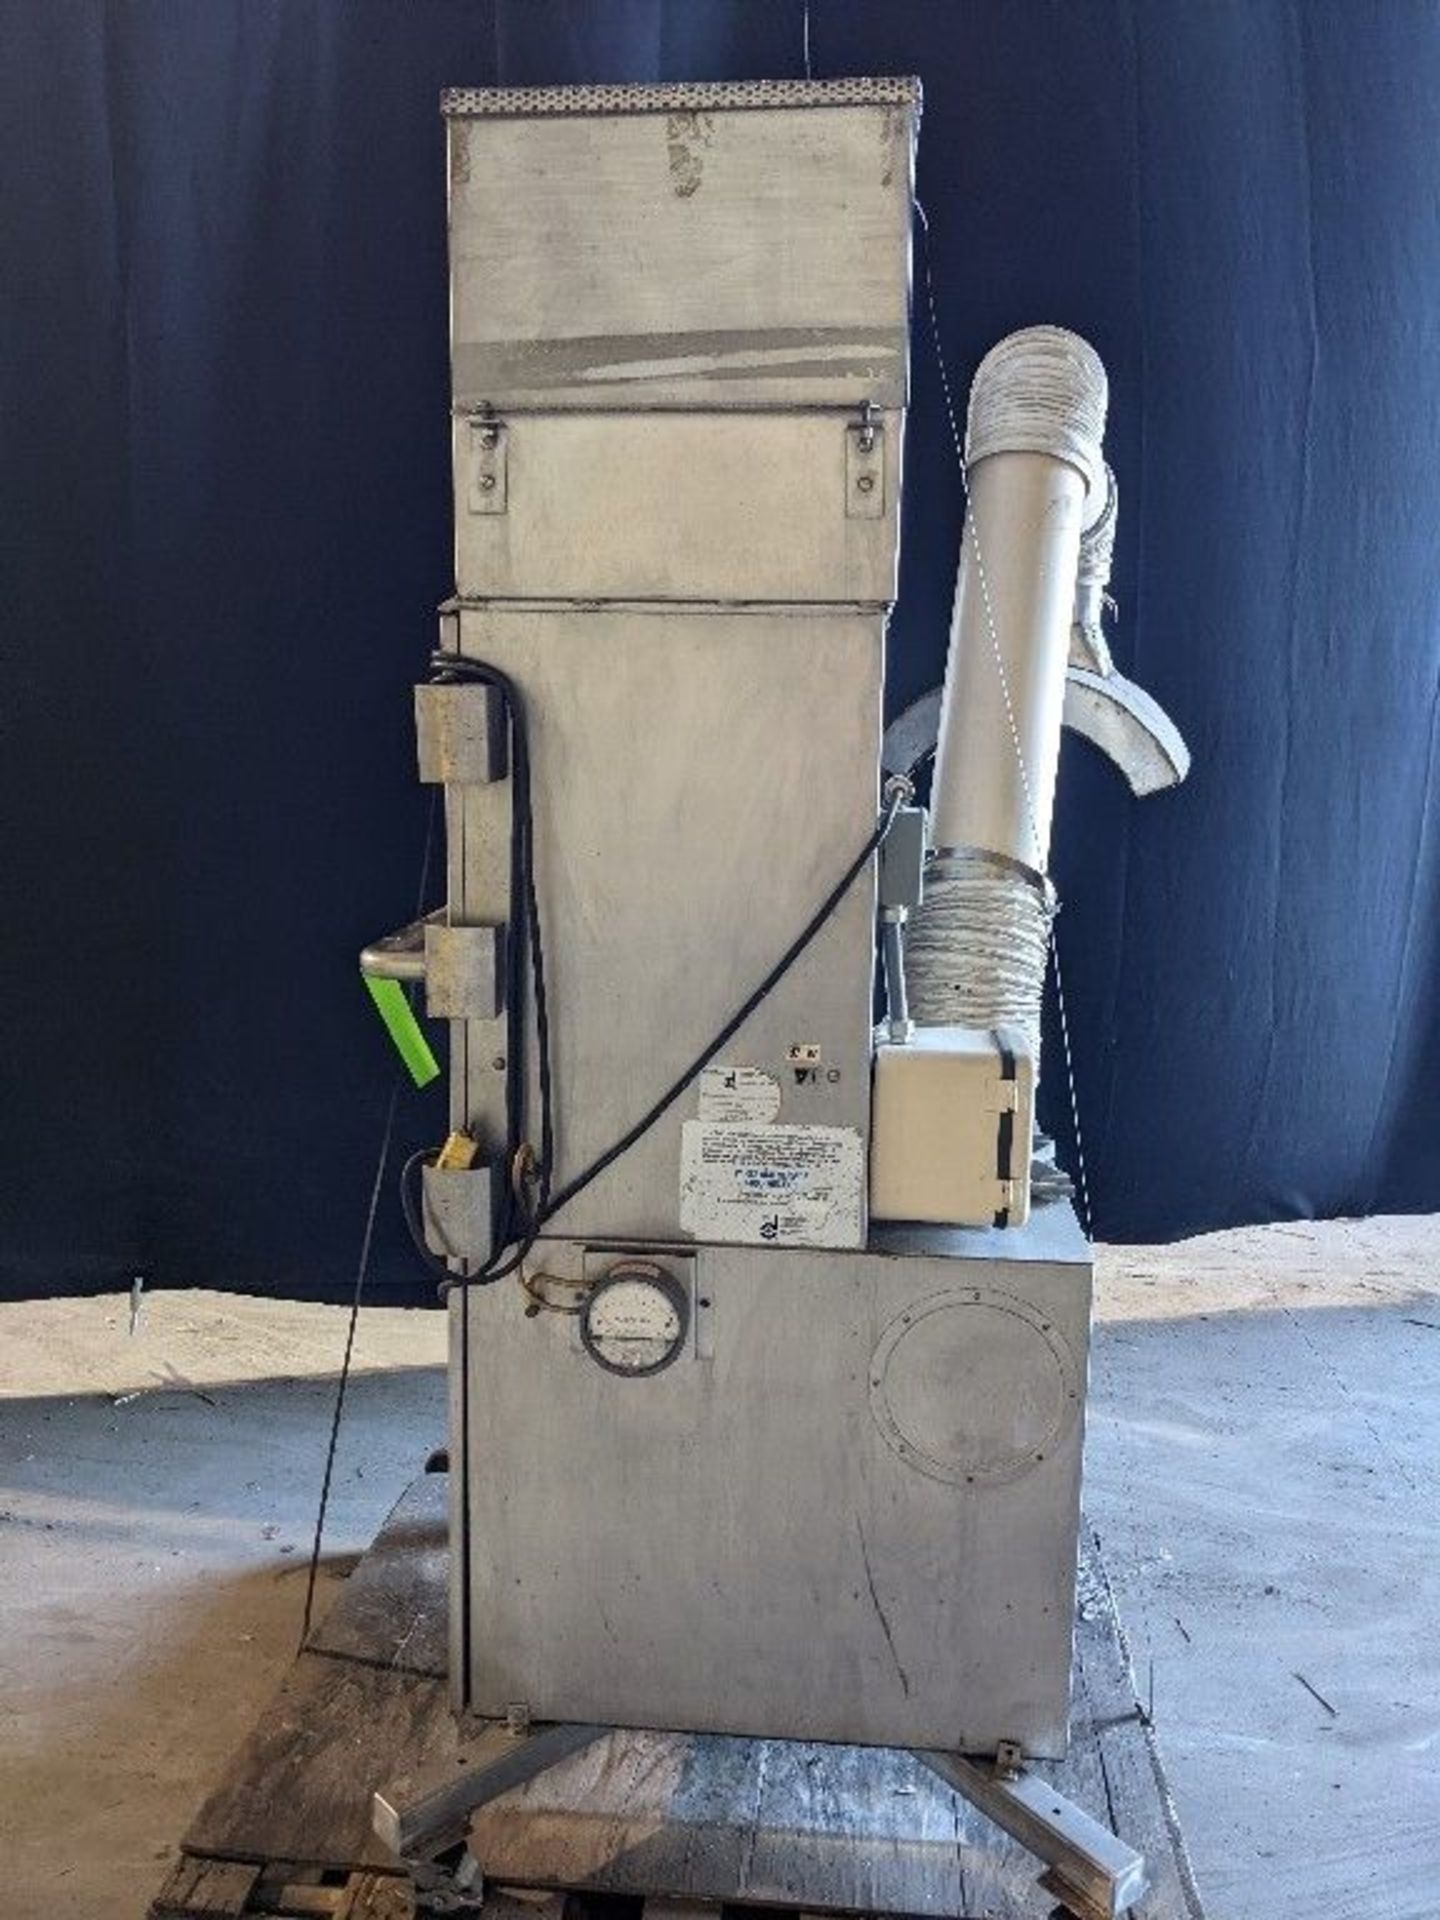 Qty (1) Torit VS 550 Stainless Dust Collector - All stainless-steel dust collector. - 3/4 HP 110V - Image 5 of 8